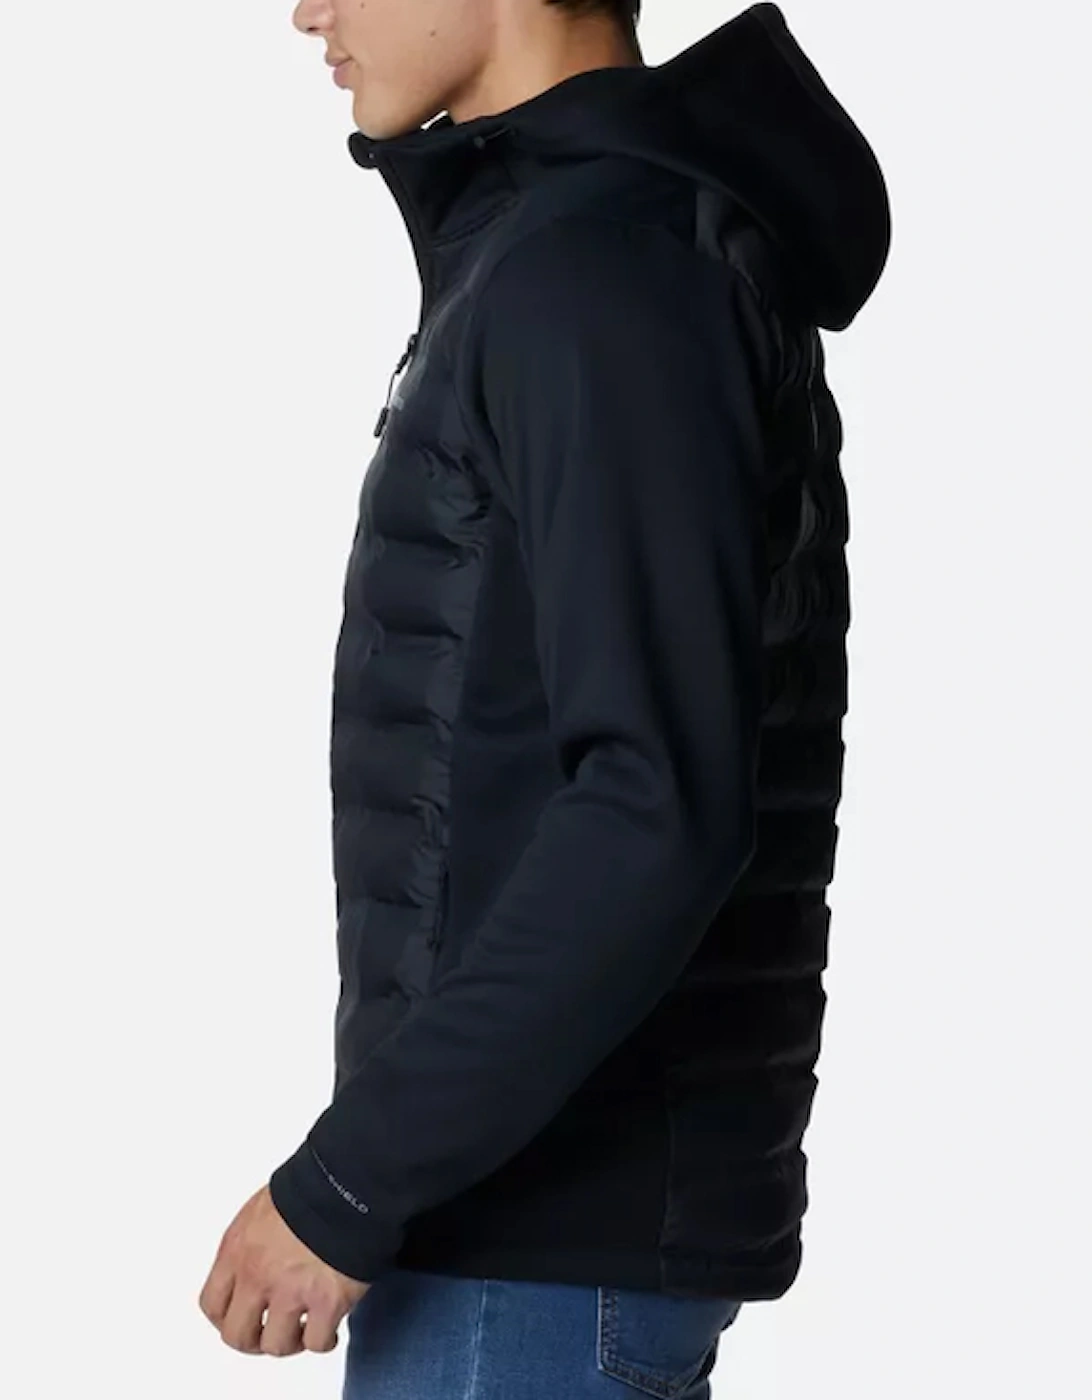 Men's Out-Shield Insulated Full Zip Hoodie Black